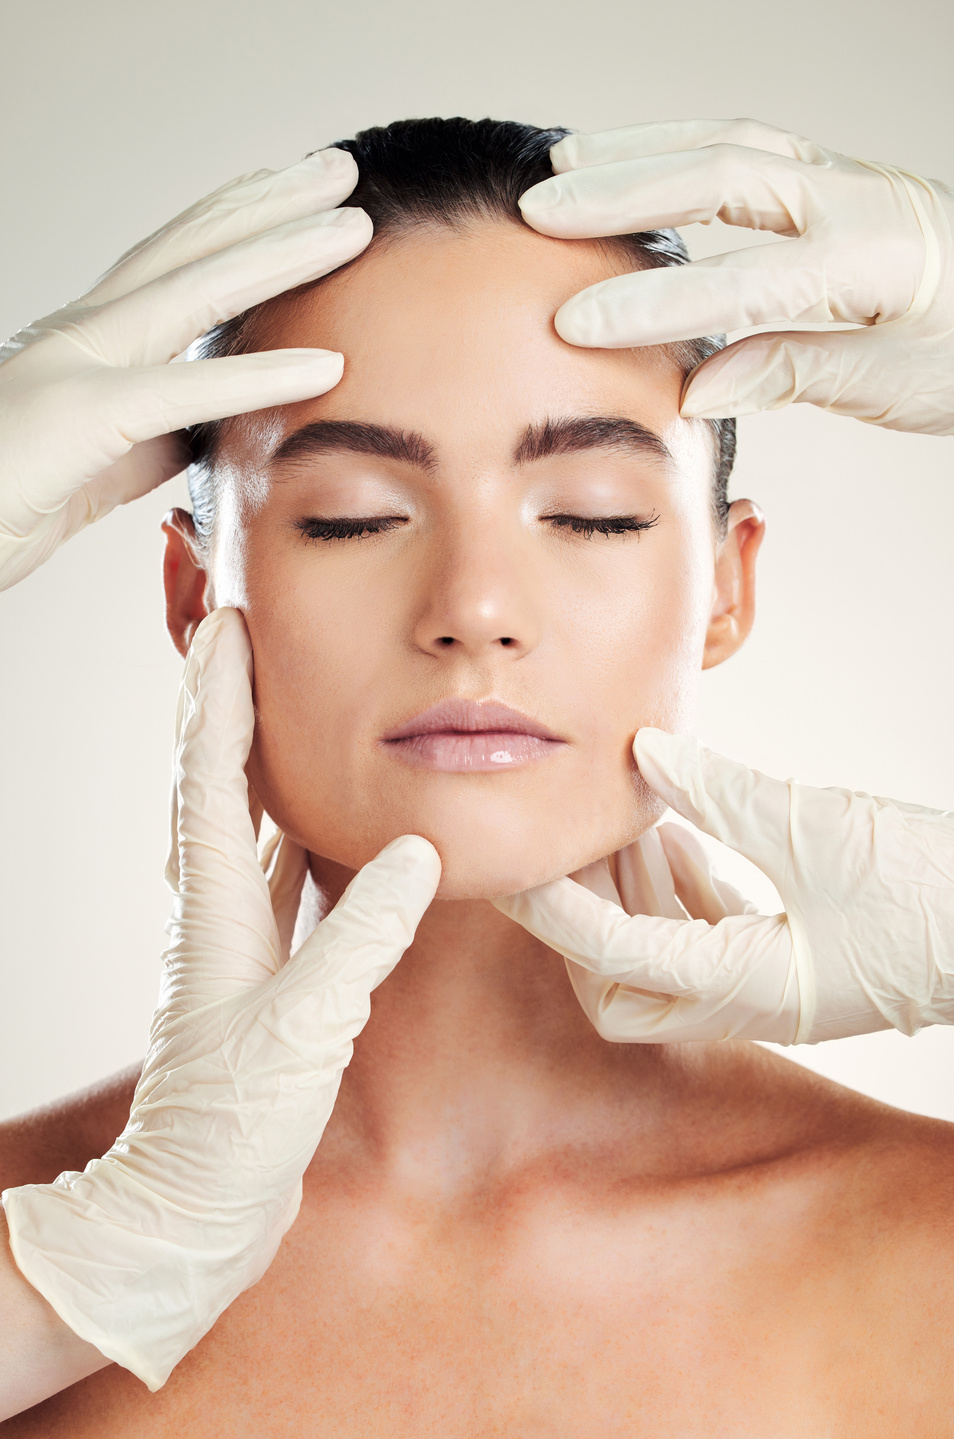 Skincare, Plastic Surgery and Facial Filler on Woman with Dermatology Collagen Cosmetics. Headshot of a Beauty Model Person with Professional Hands for Medical Procedure on Face Skin